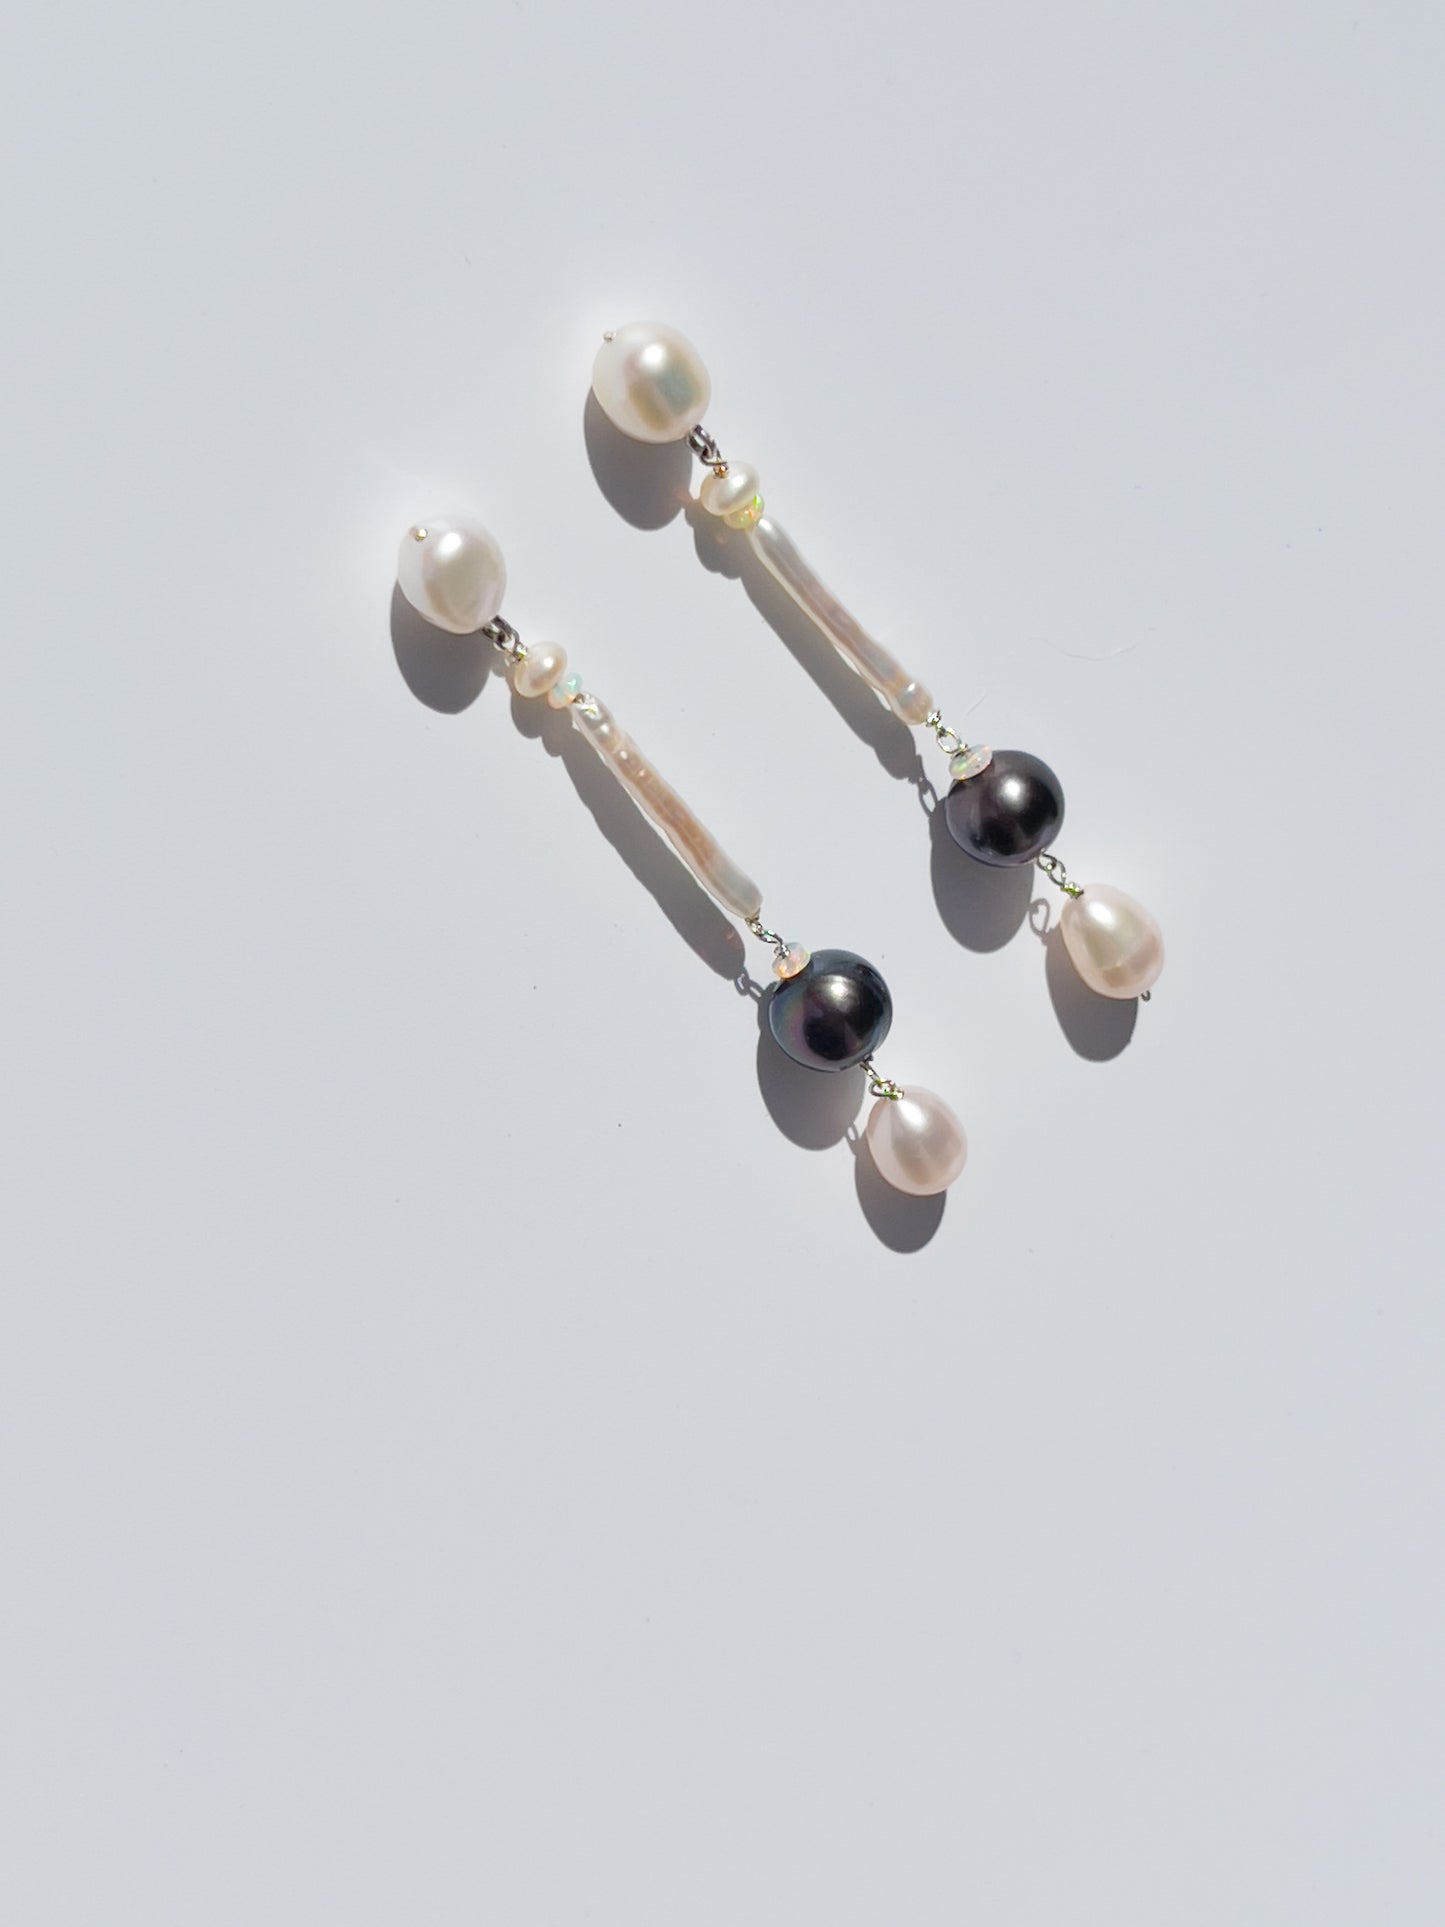 Nāmaka Tahitian Black Pearl & Opal Drop Earrings - These earrings are an absolute showstopper. Hand crafted using Sterling Silver, which suspend a combination of Estate Repurposed Tahitian Black Pearls, Opals, Biwa Pearls, Freshwater Pearls. Finished with Estate Repurposed Violet teardrop AAA pearls. These Nāmaka earrings glisten in candy colours, and are uniquely gorgeous in every way.  Designed & personally handcrafted by Nāmaka in Melbourne Australia       